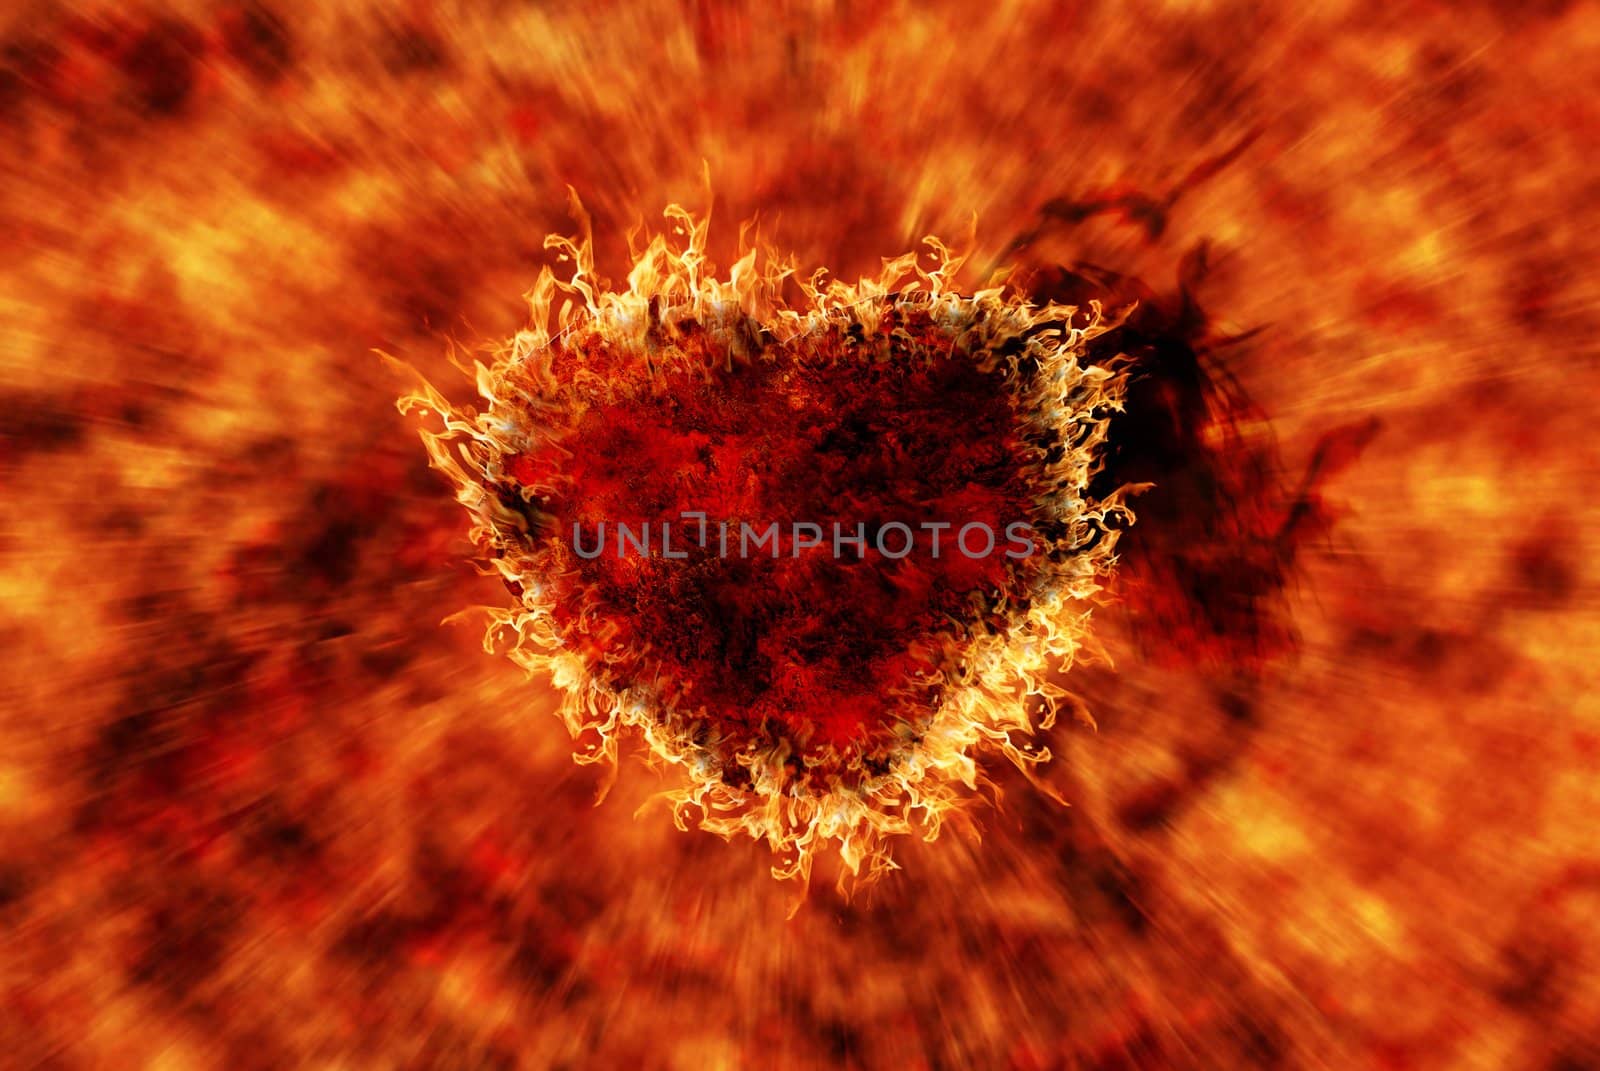 Burning heart with flame effect and zoom in flame background, can be use for various love related concepts, design and print out.